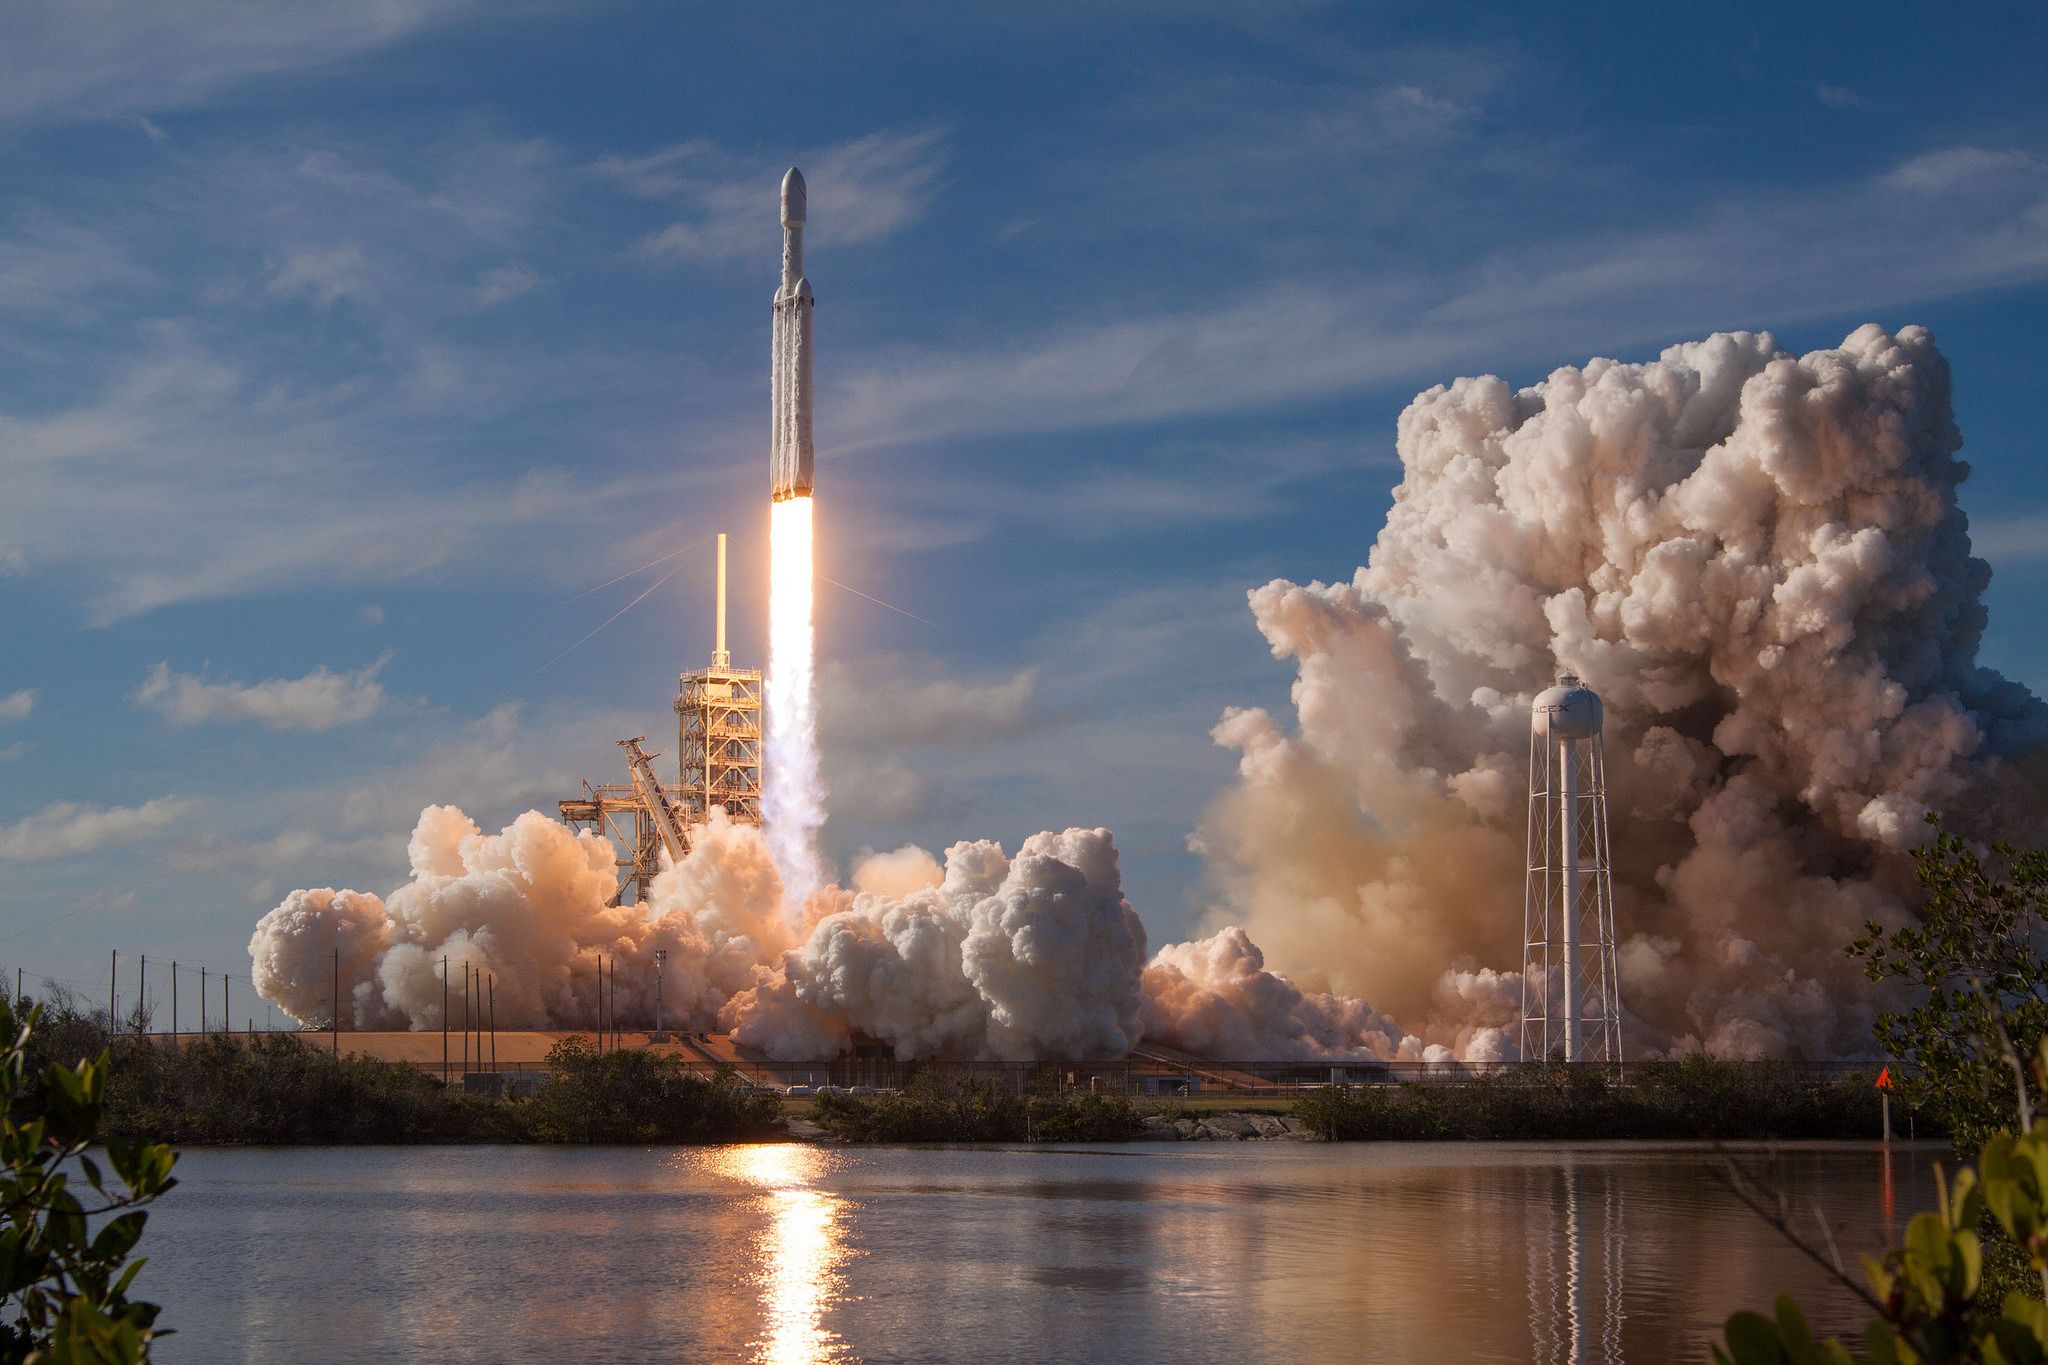 Watch Falcon Heavy Launch From Spacex Set To David Bowie Song